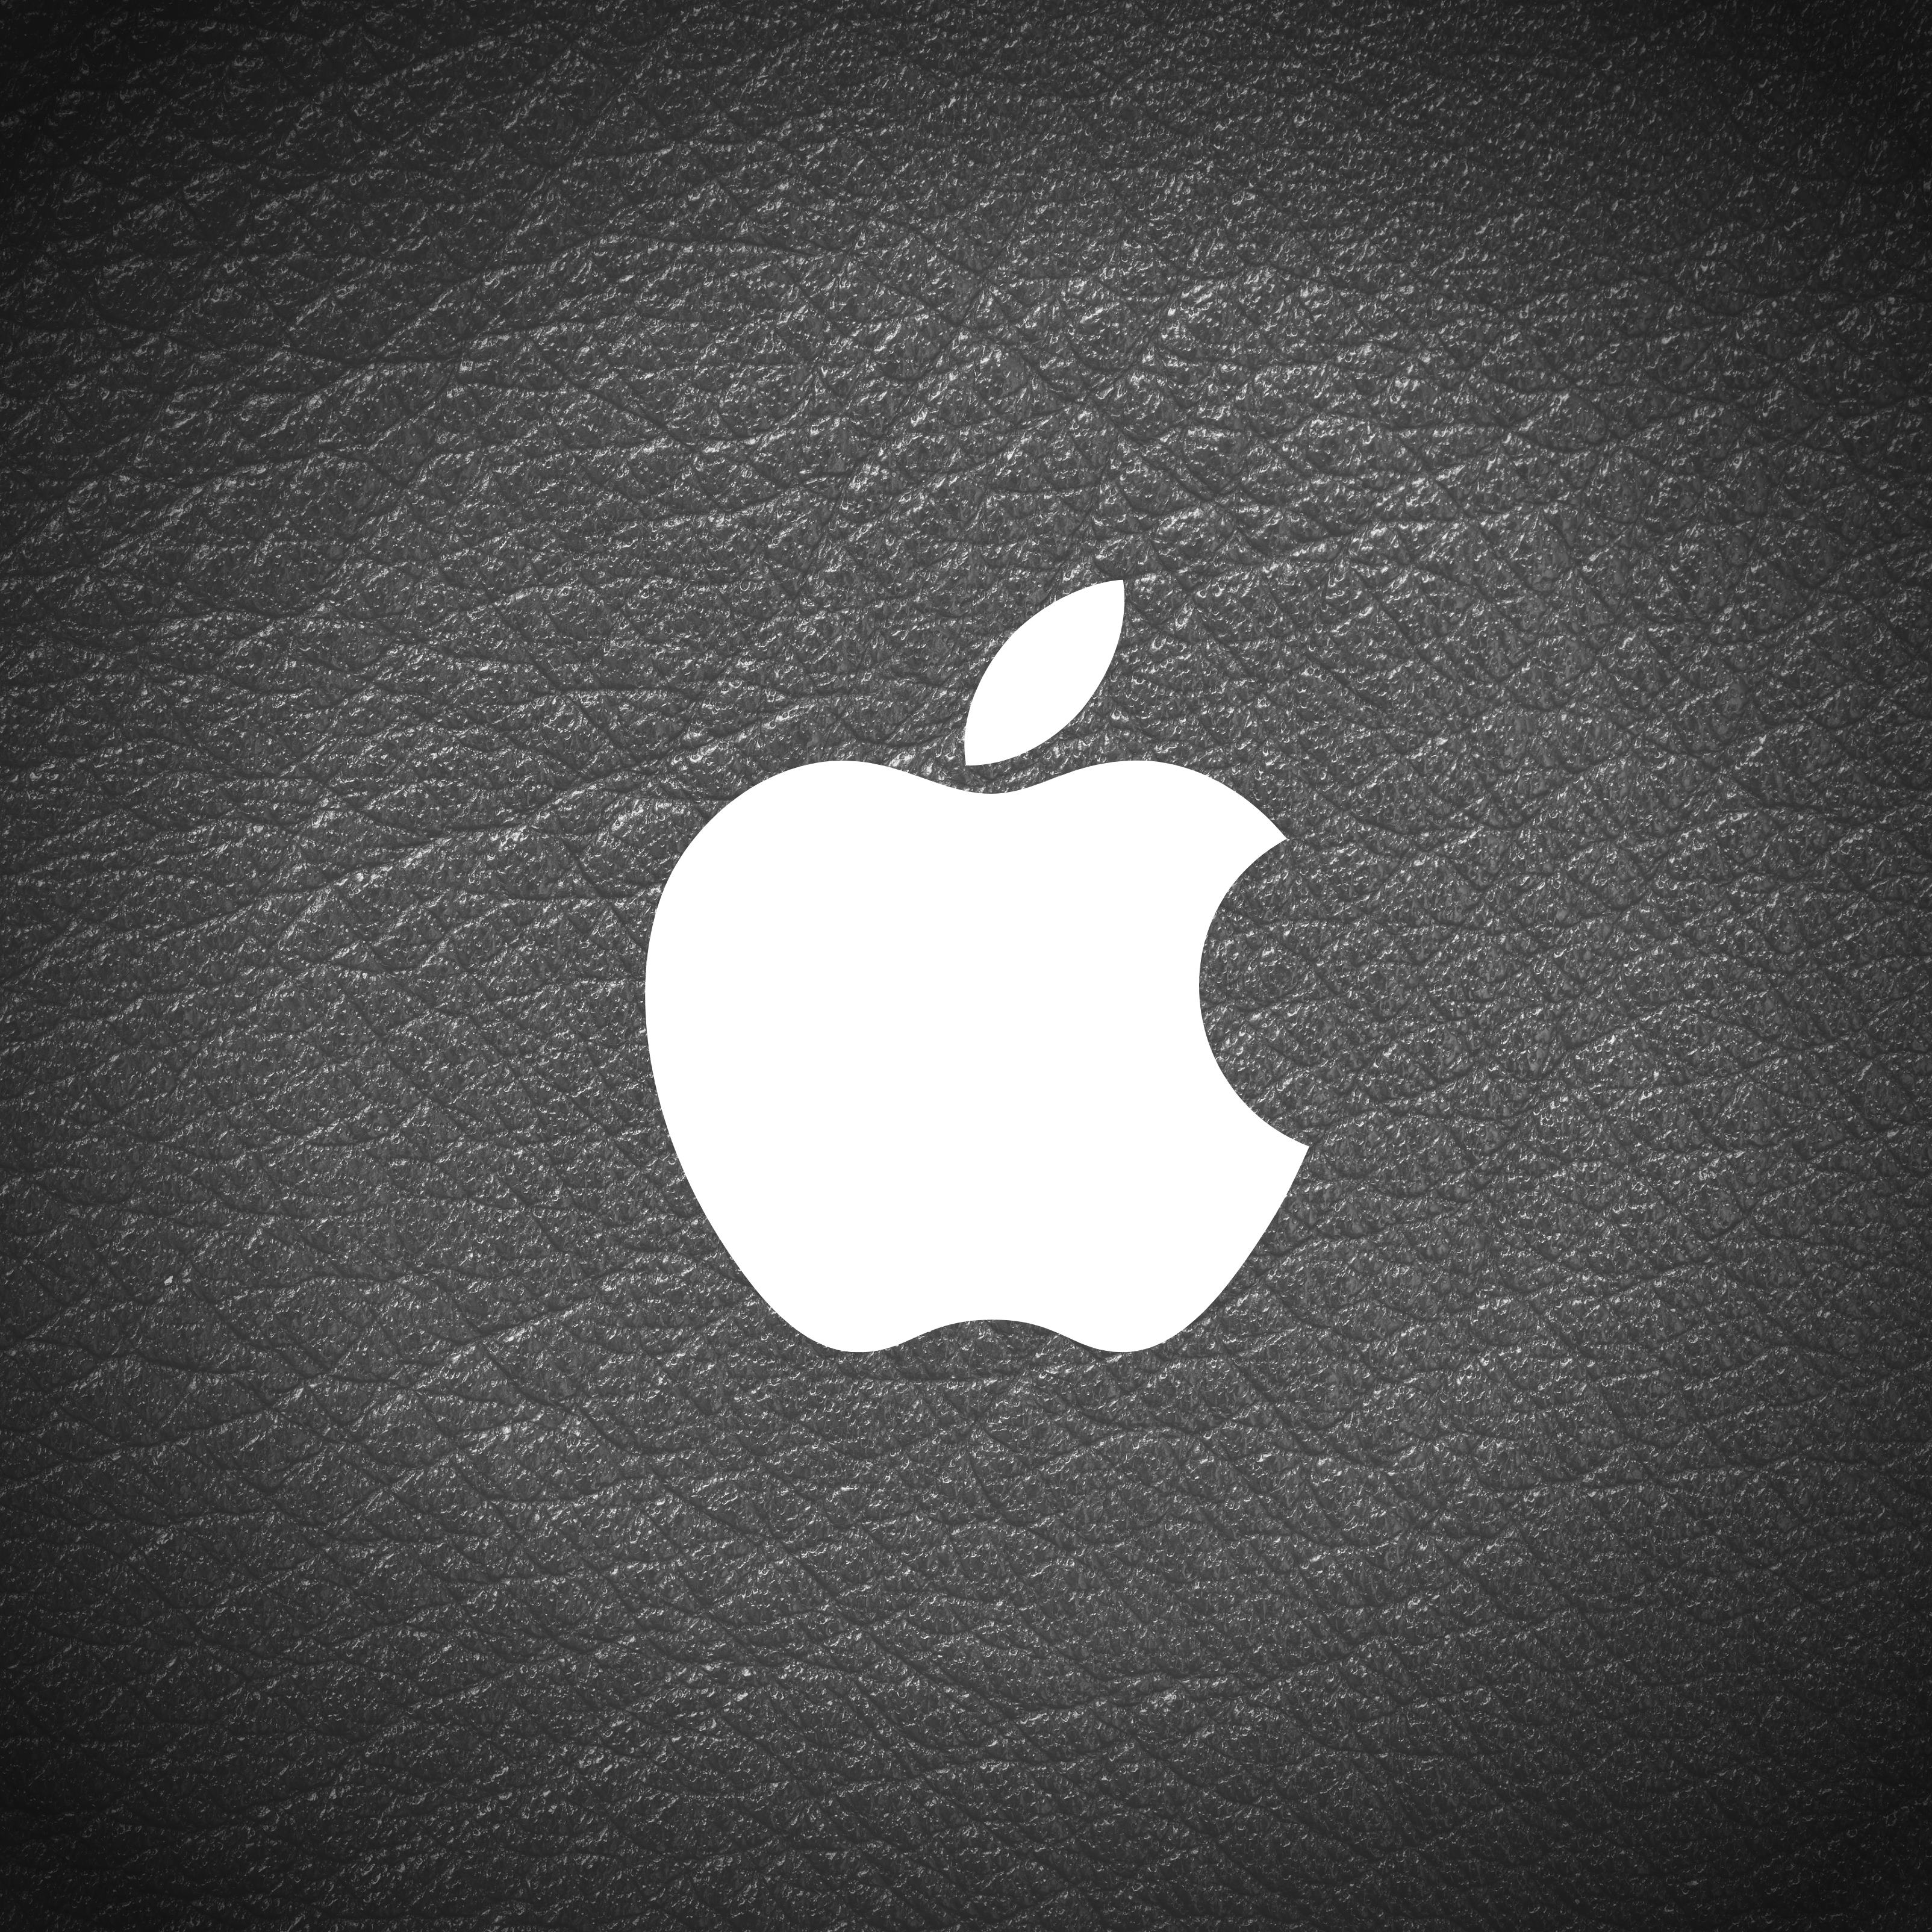 iPad Air 3 wallpapers Apple Logo Leather Black and White iPad Wallpaper